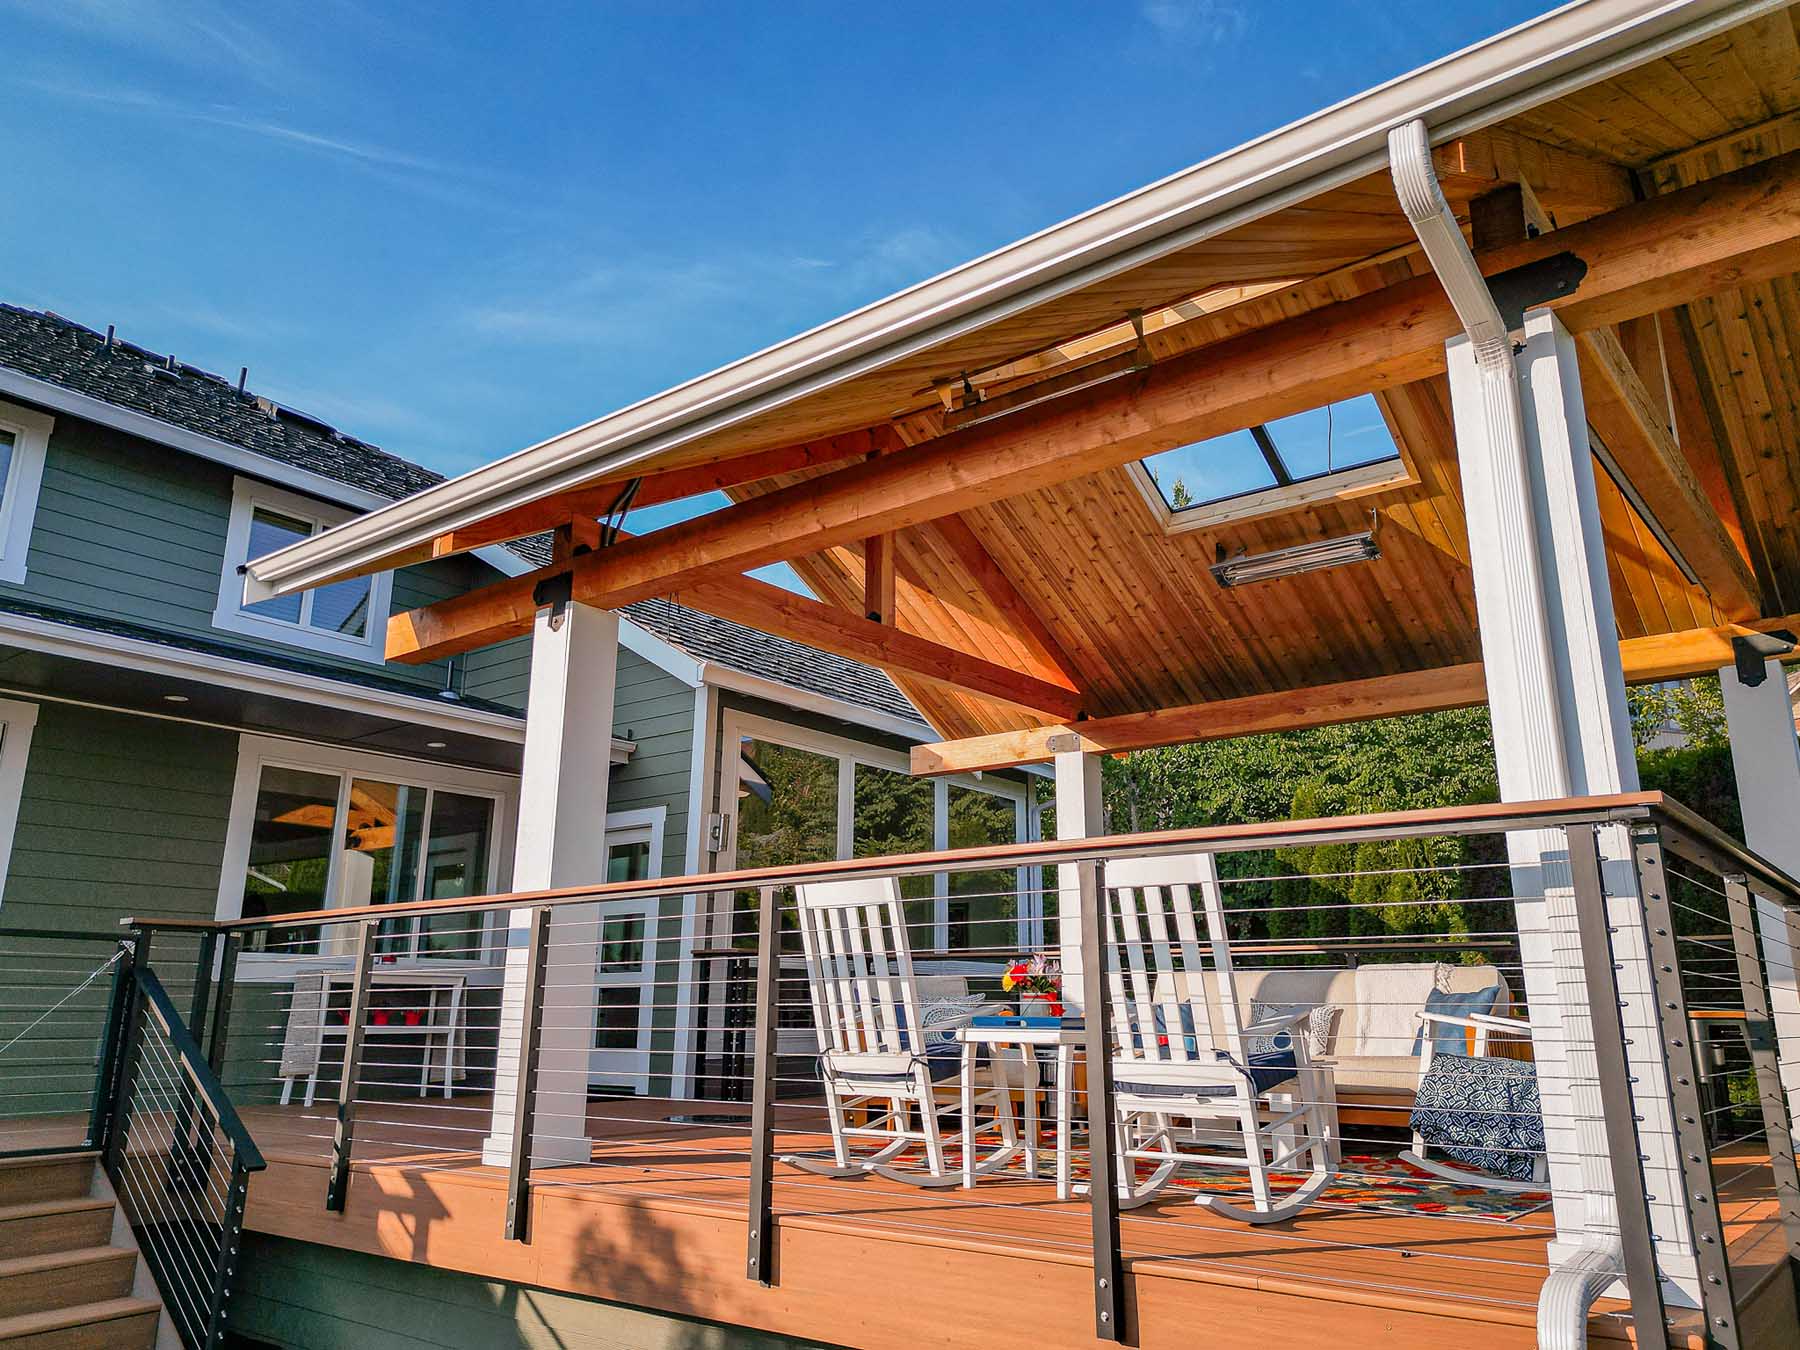 Independent roof deck cover with natural wood trim keeps you out of the rain in style